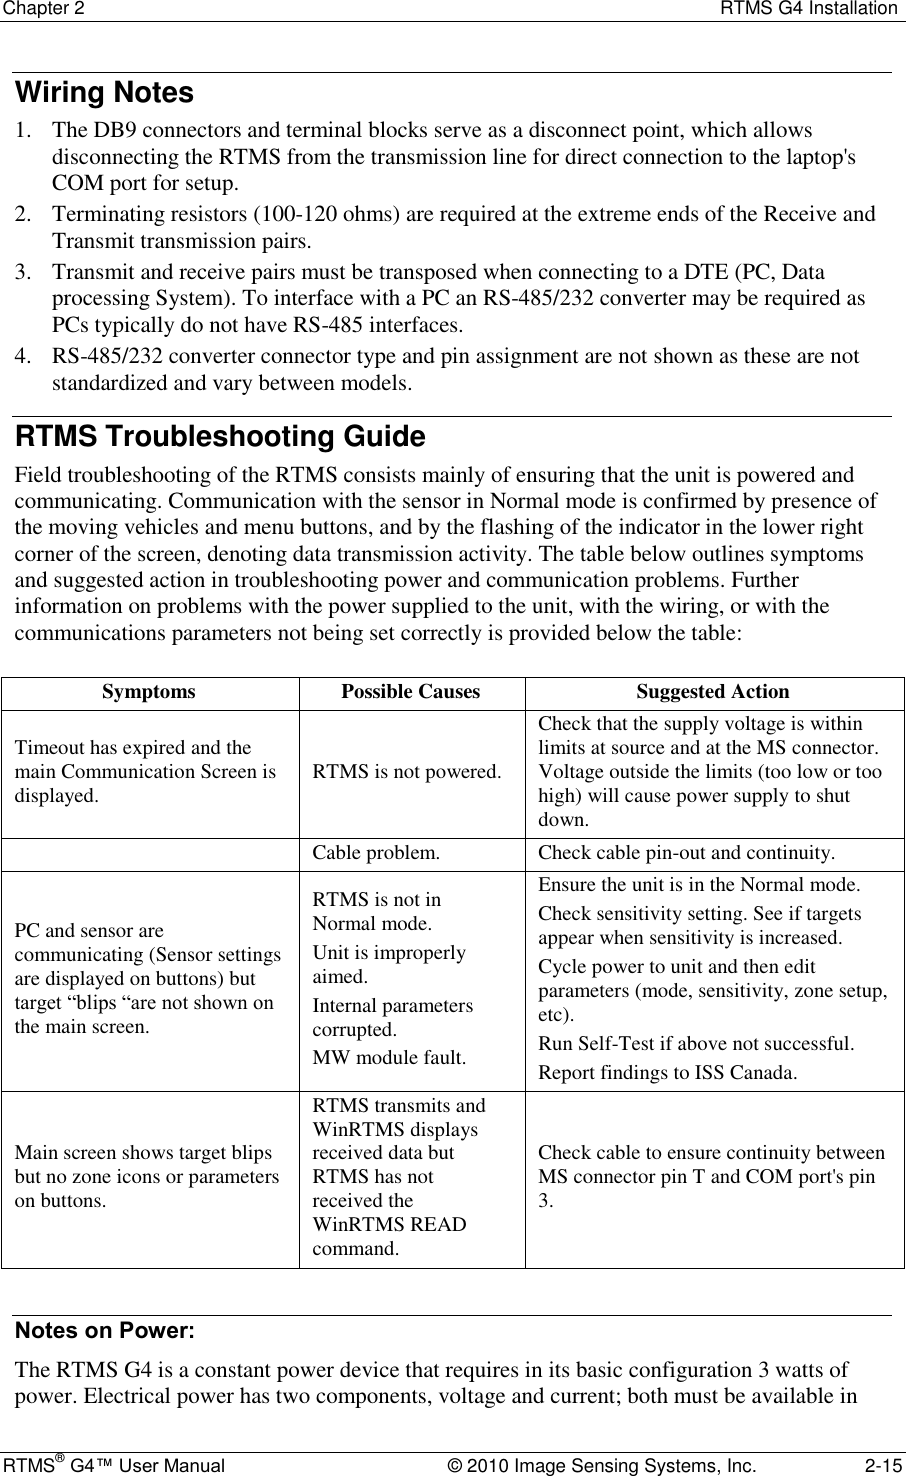 Chapter 2  RTMS G4 Installation RTMS® G4™ User Manual  © 2010 Image Sensing Systems, Inc.  2-15 Wiring Notes 1. The DB9 connectors and terminal blocks serve as a disconnect point, which allows disconnecting the RTMS from the transmission line for direct connection to the laptop&apos;s COM port for setup. 2. Terminating resistors (100-120 ohms) are required at the extreme ends of the Receive and Transmit transmission pairs. 3. Transmit and receive pairs must be transposed when connecting to a DTE (PC, Data processing System). To interface with a PC an RS-485/232 converter may be required as PCs typically do not have RS-485 interfaces. 4. RS-485/232 converter connector type and pin assignment are not shown as these are not standardized and vary between models. RTMS Troubleshooting Guide Field troubleshooting of the RTMS consists mainly of ensuring that the unit is powered and communicating. Communication with the sensor in Normal mode is confirmed by presence of the moving vehicles and menu buttons, and by the flashing of the indicator in the lower right corner of the screen, denoting data transmission activity. The table below outlines symptoms and suggested action in troubleshooting power and communication problems. Further information on problems with the power supplied to the unit, with the wiring, or with the communications parameters not being set correctly is provided below the table:  Symptoms Possible Causes Suggested Action Timeout has expired and the main Communication Screen is displayed. RTMS is not powered. Check that the supply voltage is within limits at source and at the MS connector. Voltage outside the limits (too low or too high) will cause power supply to shut down.  Cable problem. Check cable pin-out and continuity. PC and sensor are communicating (Sensor settings are displayed on buttons) but target ―blips ―are not shown on the main screen. RTMS is not in Normal mode. Unit is improperly aimed. Internal parameters corrupted. MW module fault. Ensure the unit is in the Normal mode. Check sensitivity setting. See if targets appear when sensitivity is increased. Cycle power to unit and then edit parameters (mode, sensitivity, zone setup, etc). Run Self-Test if above not successful. Report findings to ISS Canada. Main screen shows target blips but no zone icons or parameters on buttons. RTMS transmits and WinRTMS displays received data but RTMS has not received the WinRTMS READ command. Check cable to ensure continuity between MS connector pin T and COM port&apos;s pin 3.  Notes on Power: The RTMS G4 is a constant power device that requires in its basic configuration 3 watts of power. Electrical power has two components, voltage and current; both must be available in 